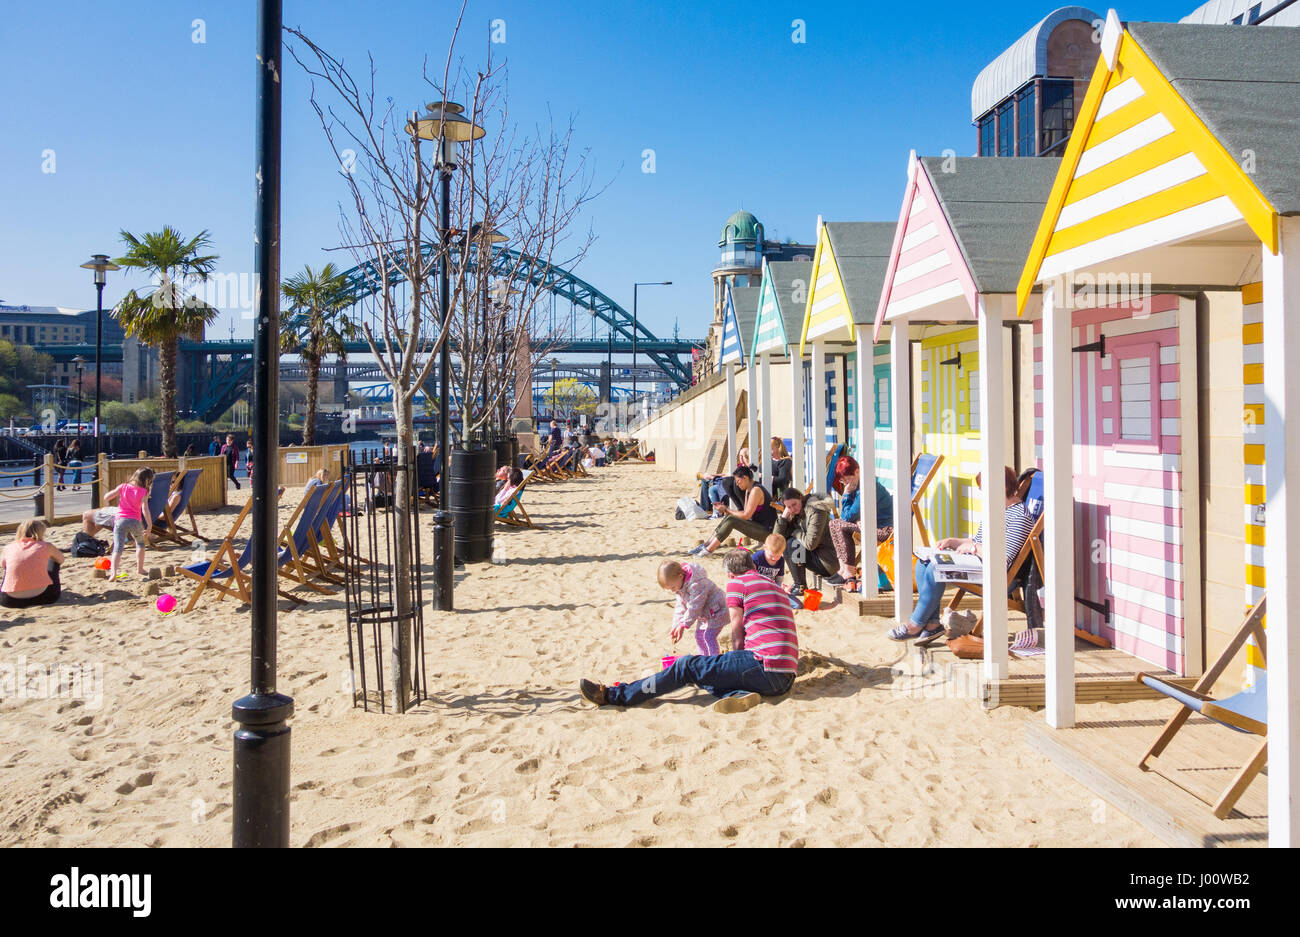 Pop up beach on The Quayside, "Quayside Seaside" in Newcastle upon Tyne, England, United Kingdom. Stock Photo